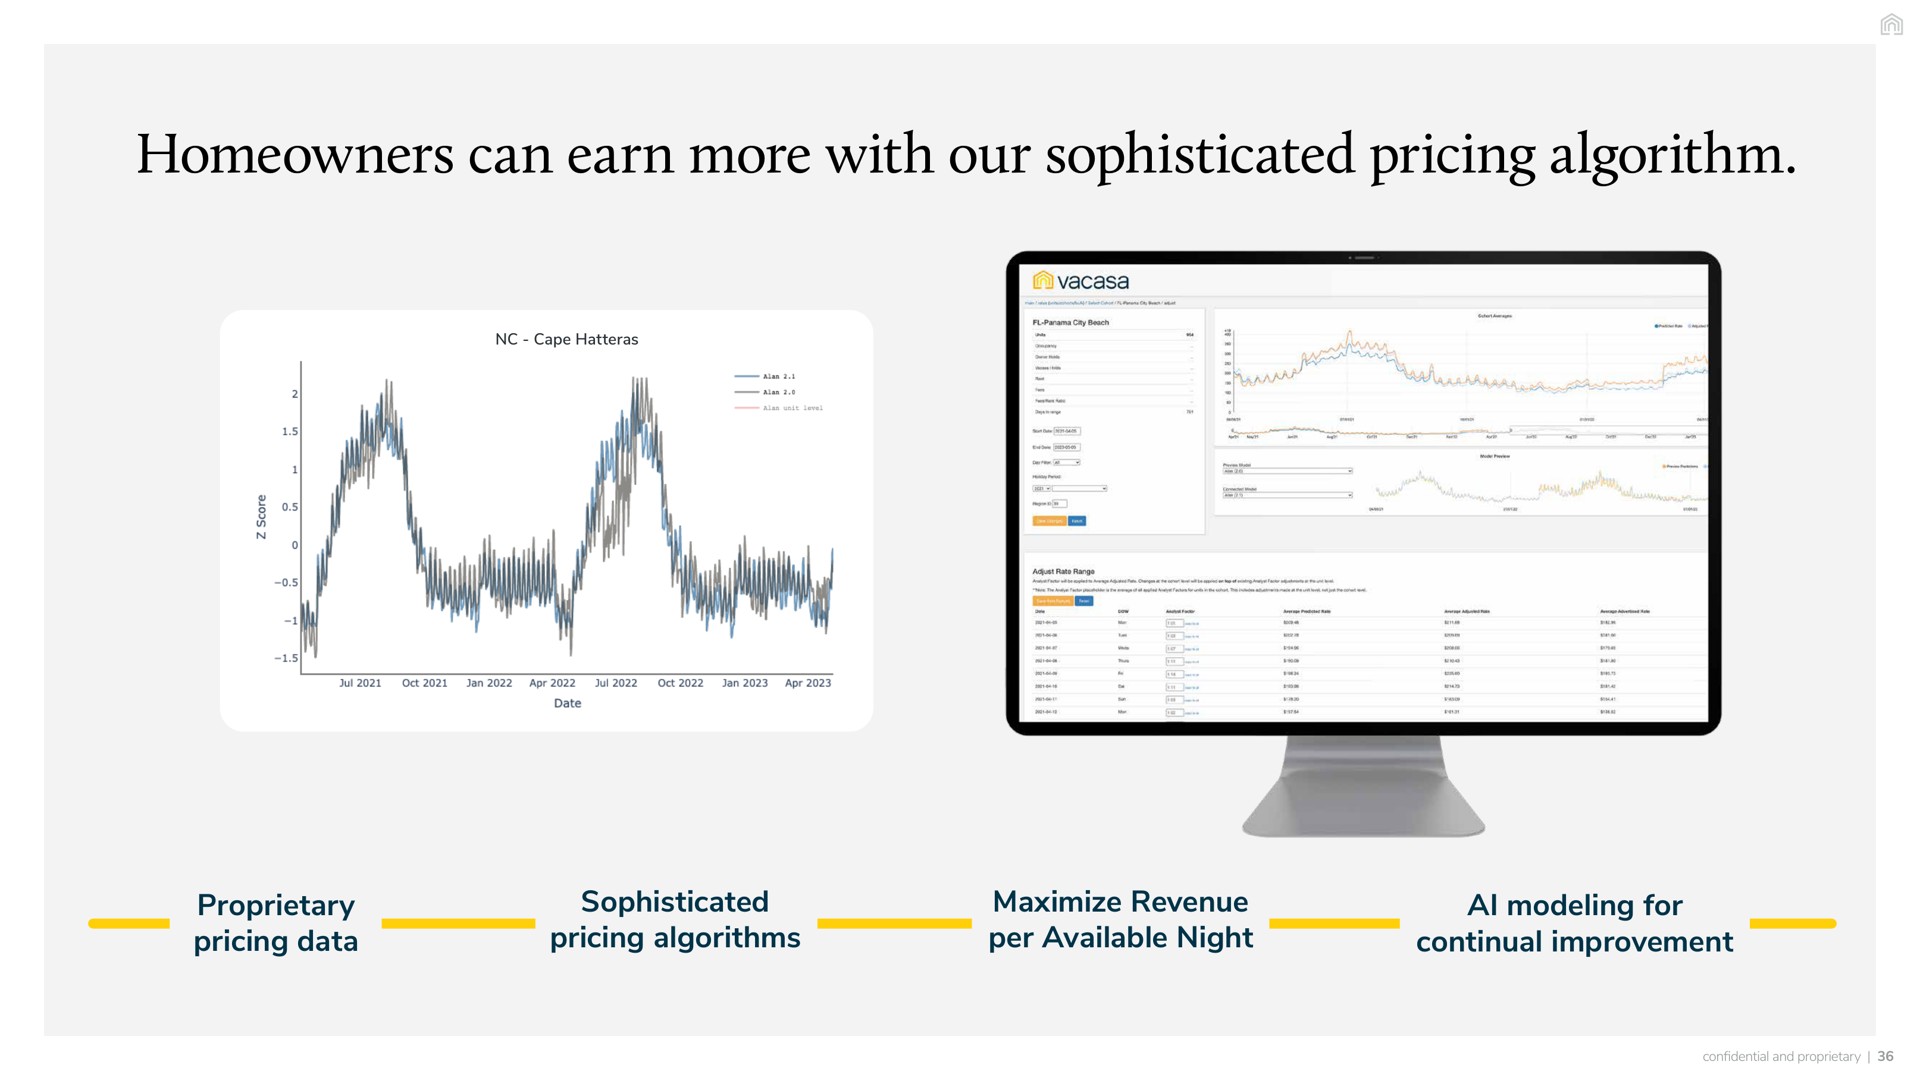 homeowners can earn more with our sophisticated pricing algorithm cape date proprietary data algorithms maximize revenue per available night modeling for continual improvement | Vacasa